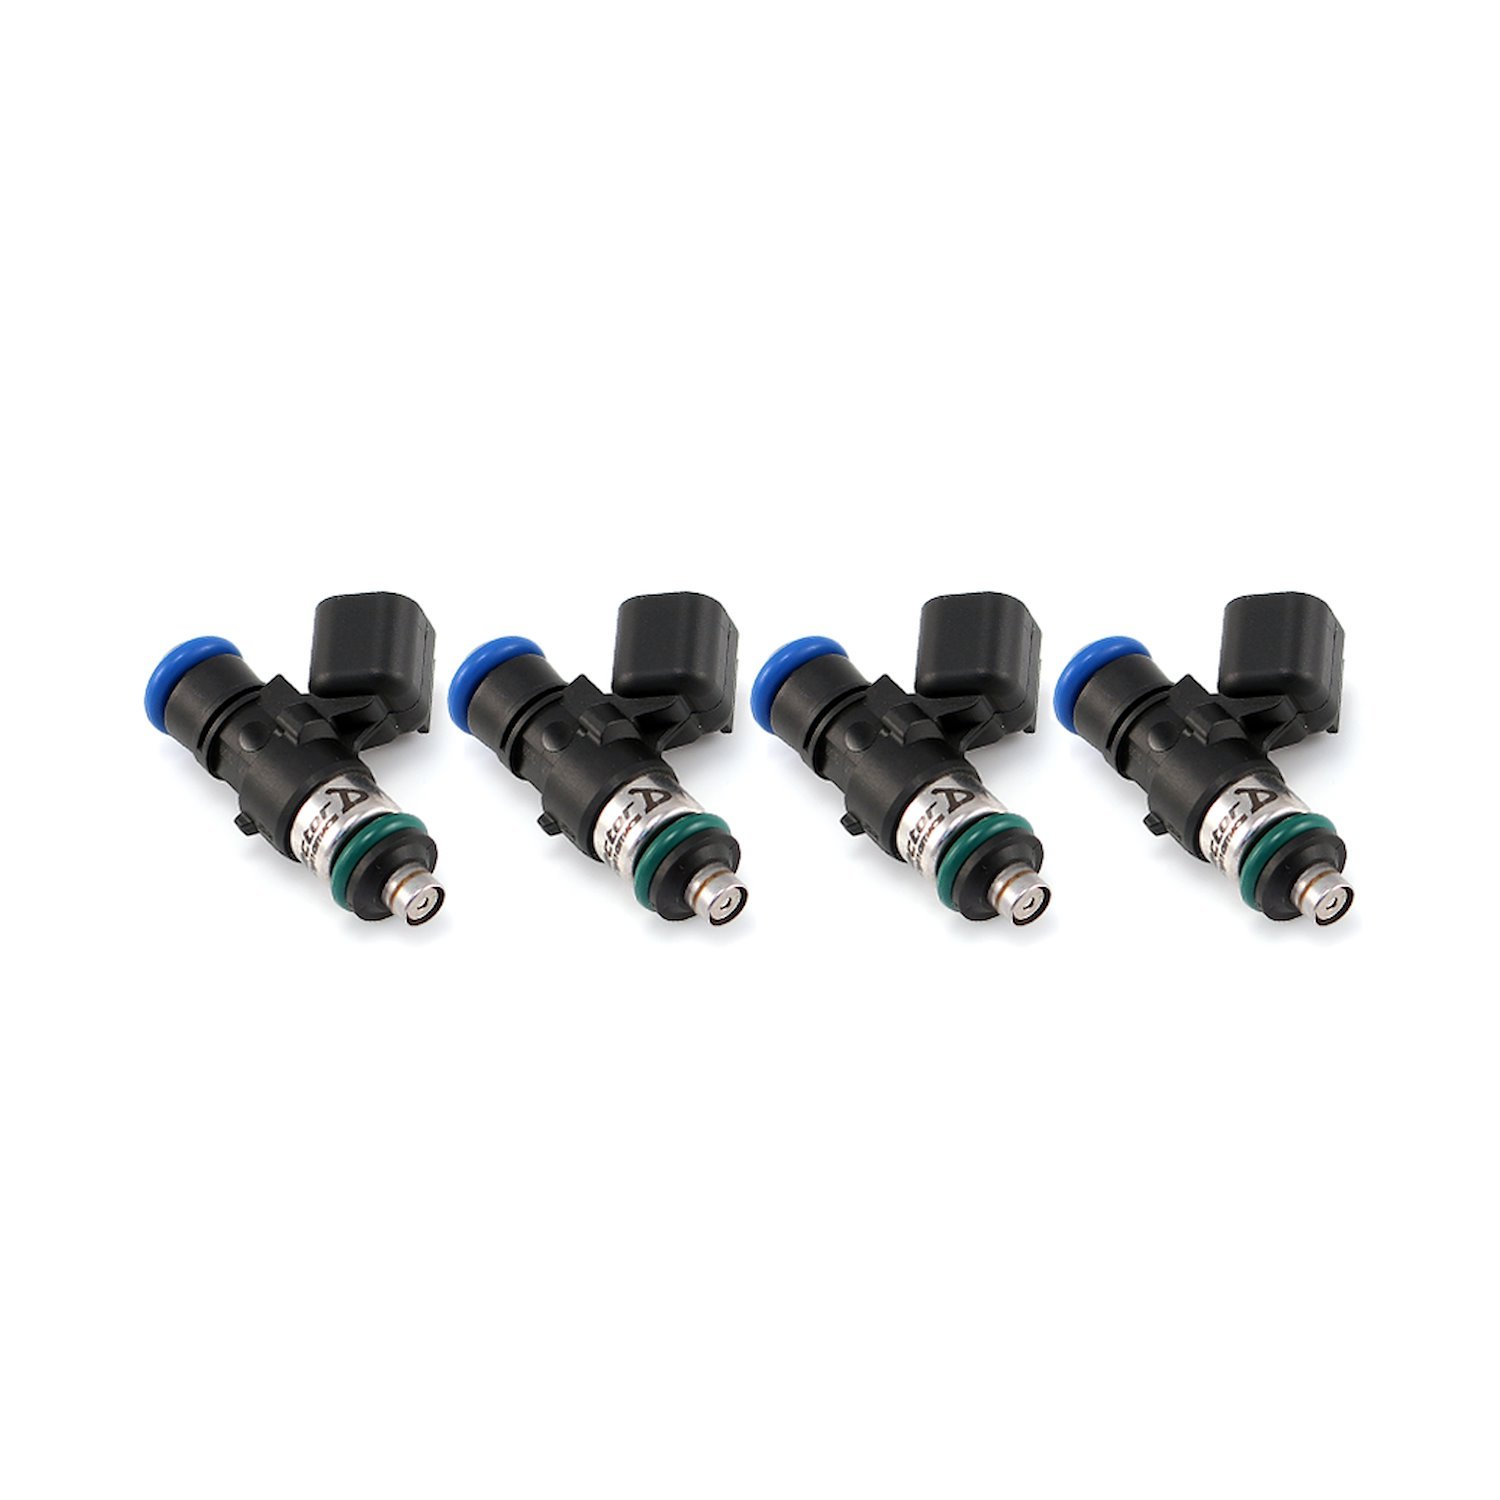 1050.34.14.14.4 1050cc Fuel Injector, 34 mm Length, 14 mm Top O-Ring, 14 mm Lower O-Ring